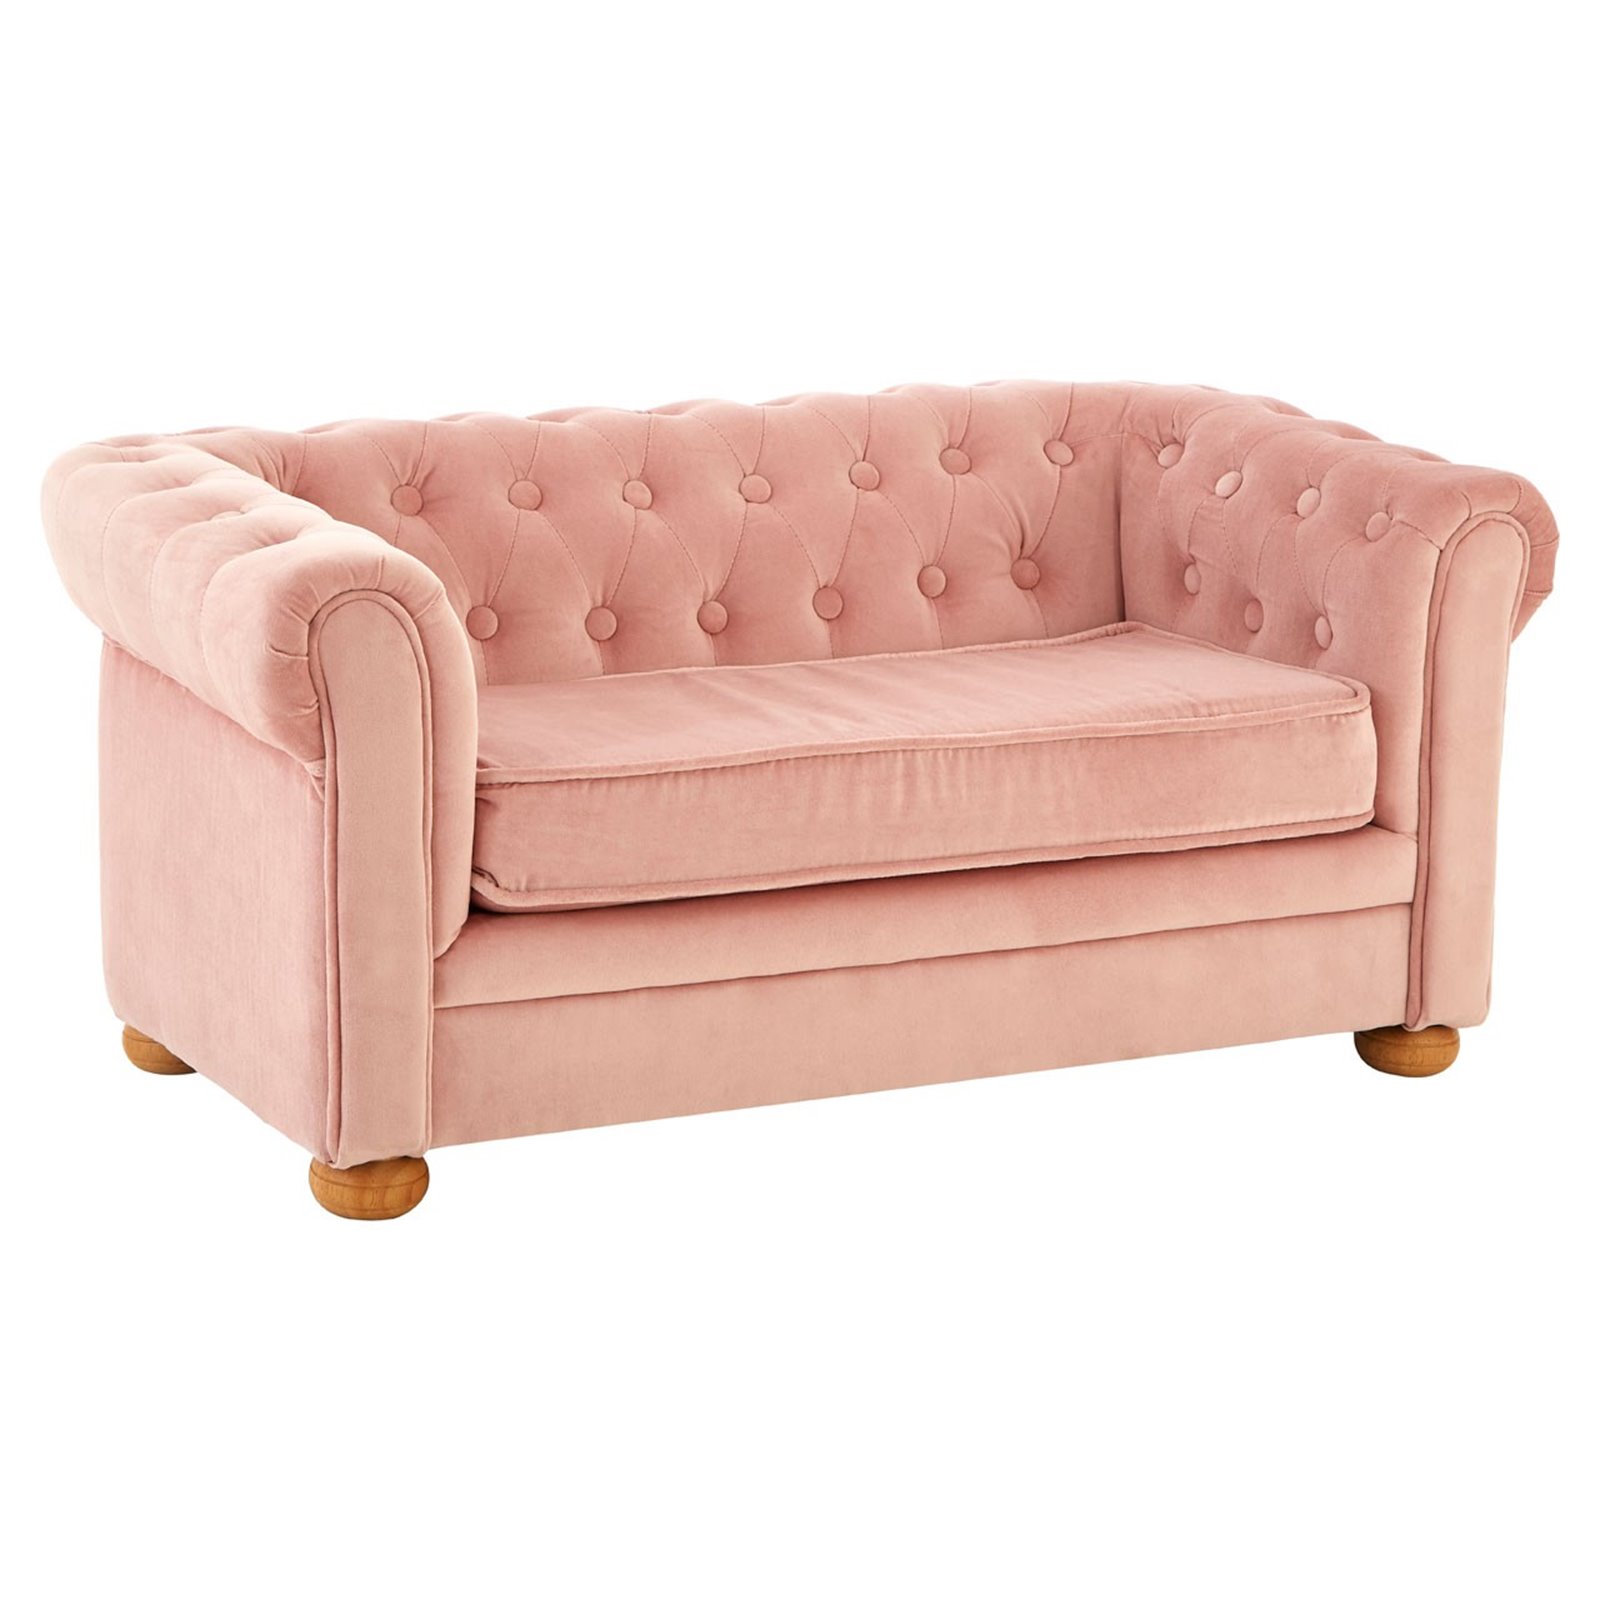 Pink Childs Chesterfield Sofa Image